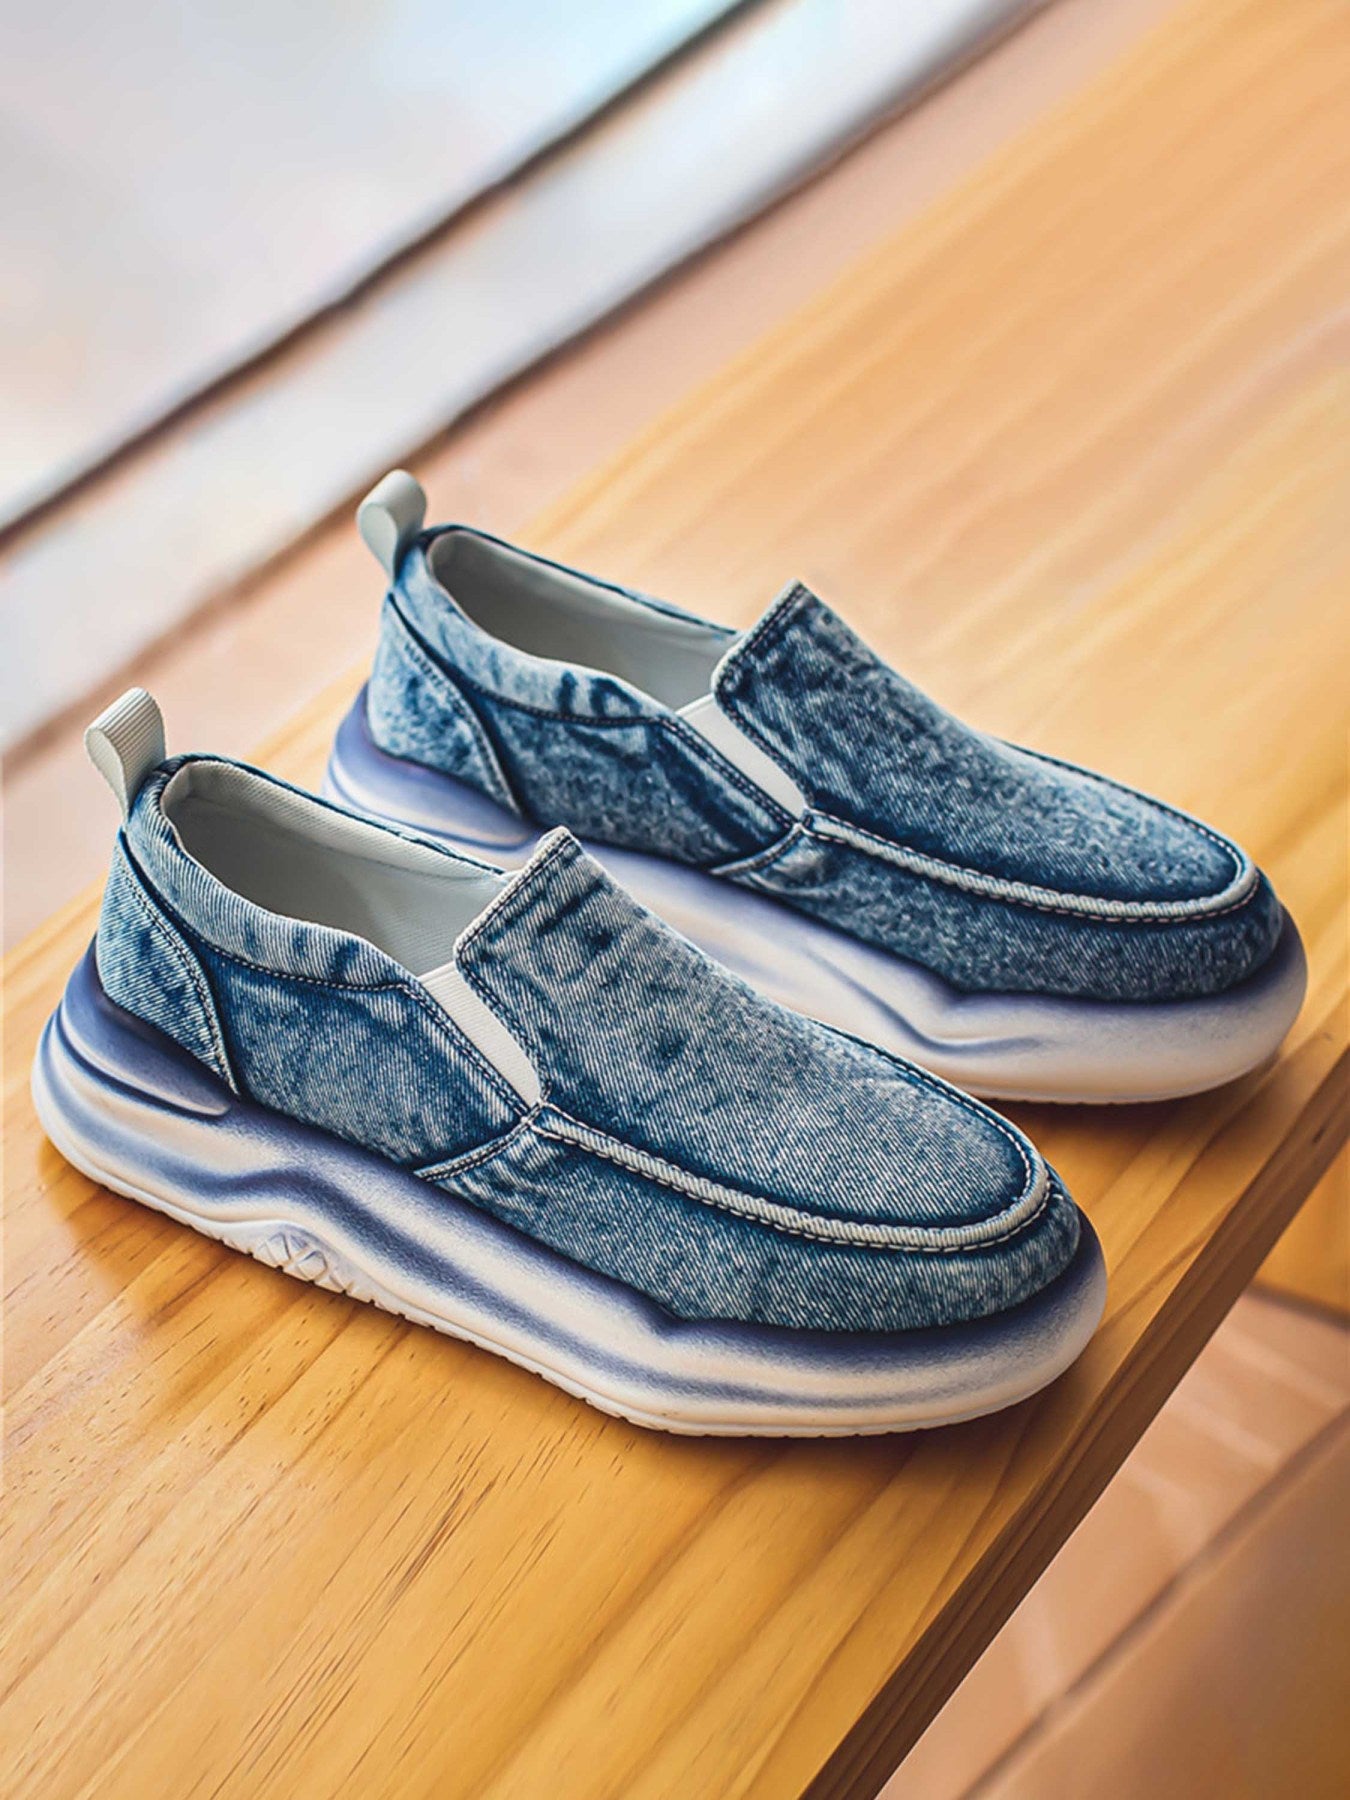 The Supermade Lightweight Tie-Dye Thick Bottom Board Shoes